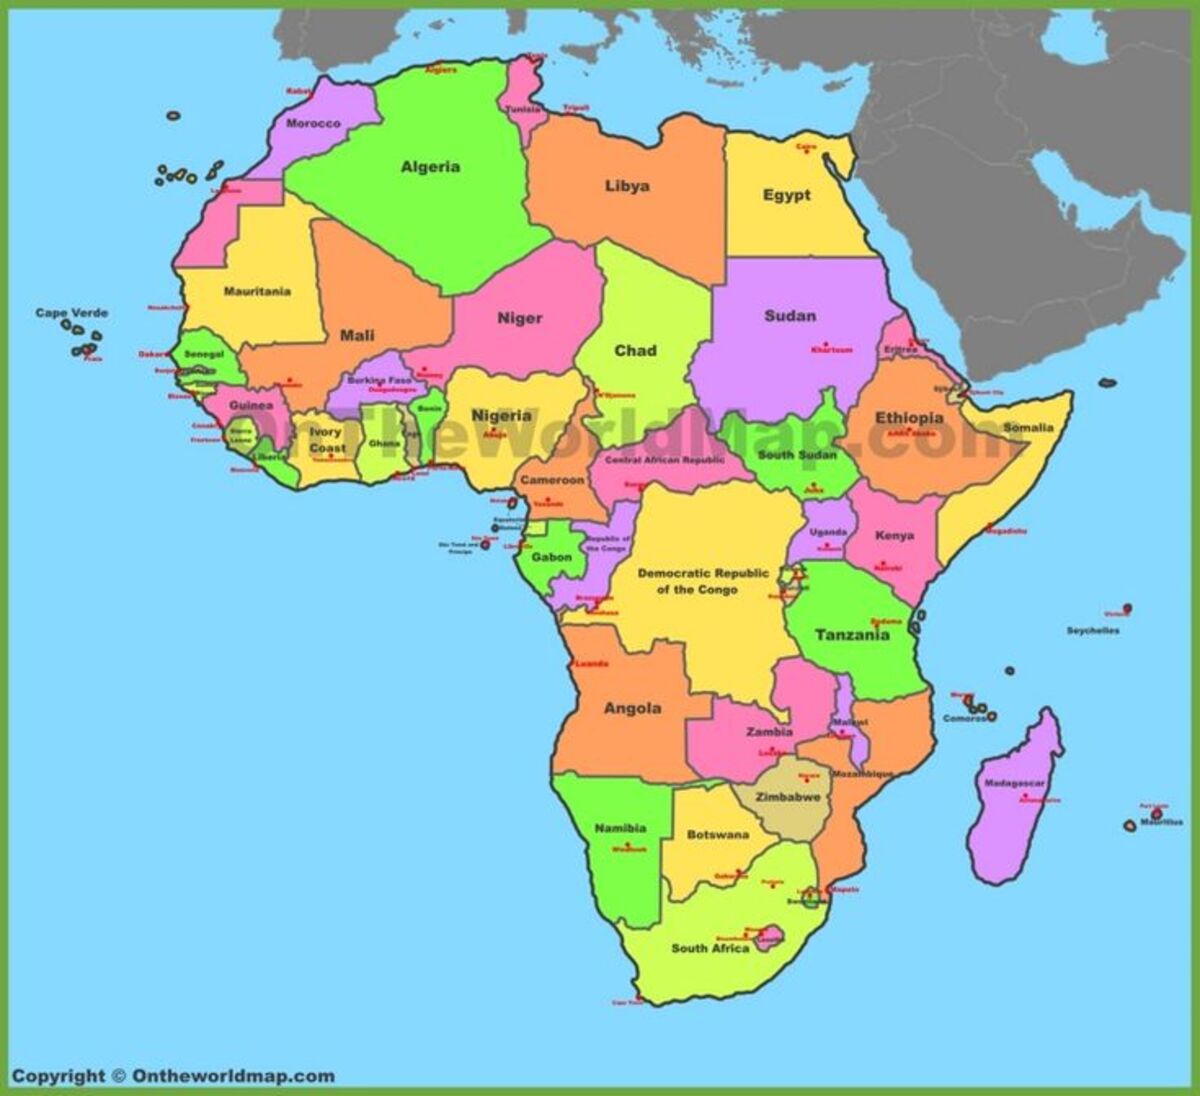 Exploring African Countries Map: A Rich Tapestry of Geography and Culture